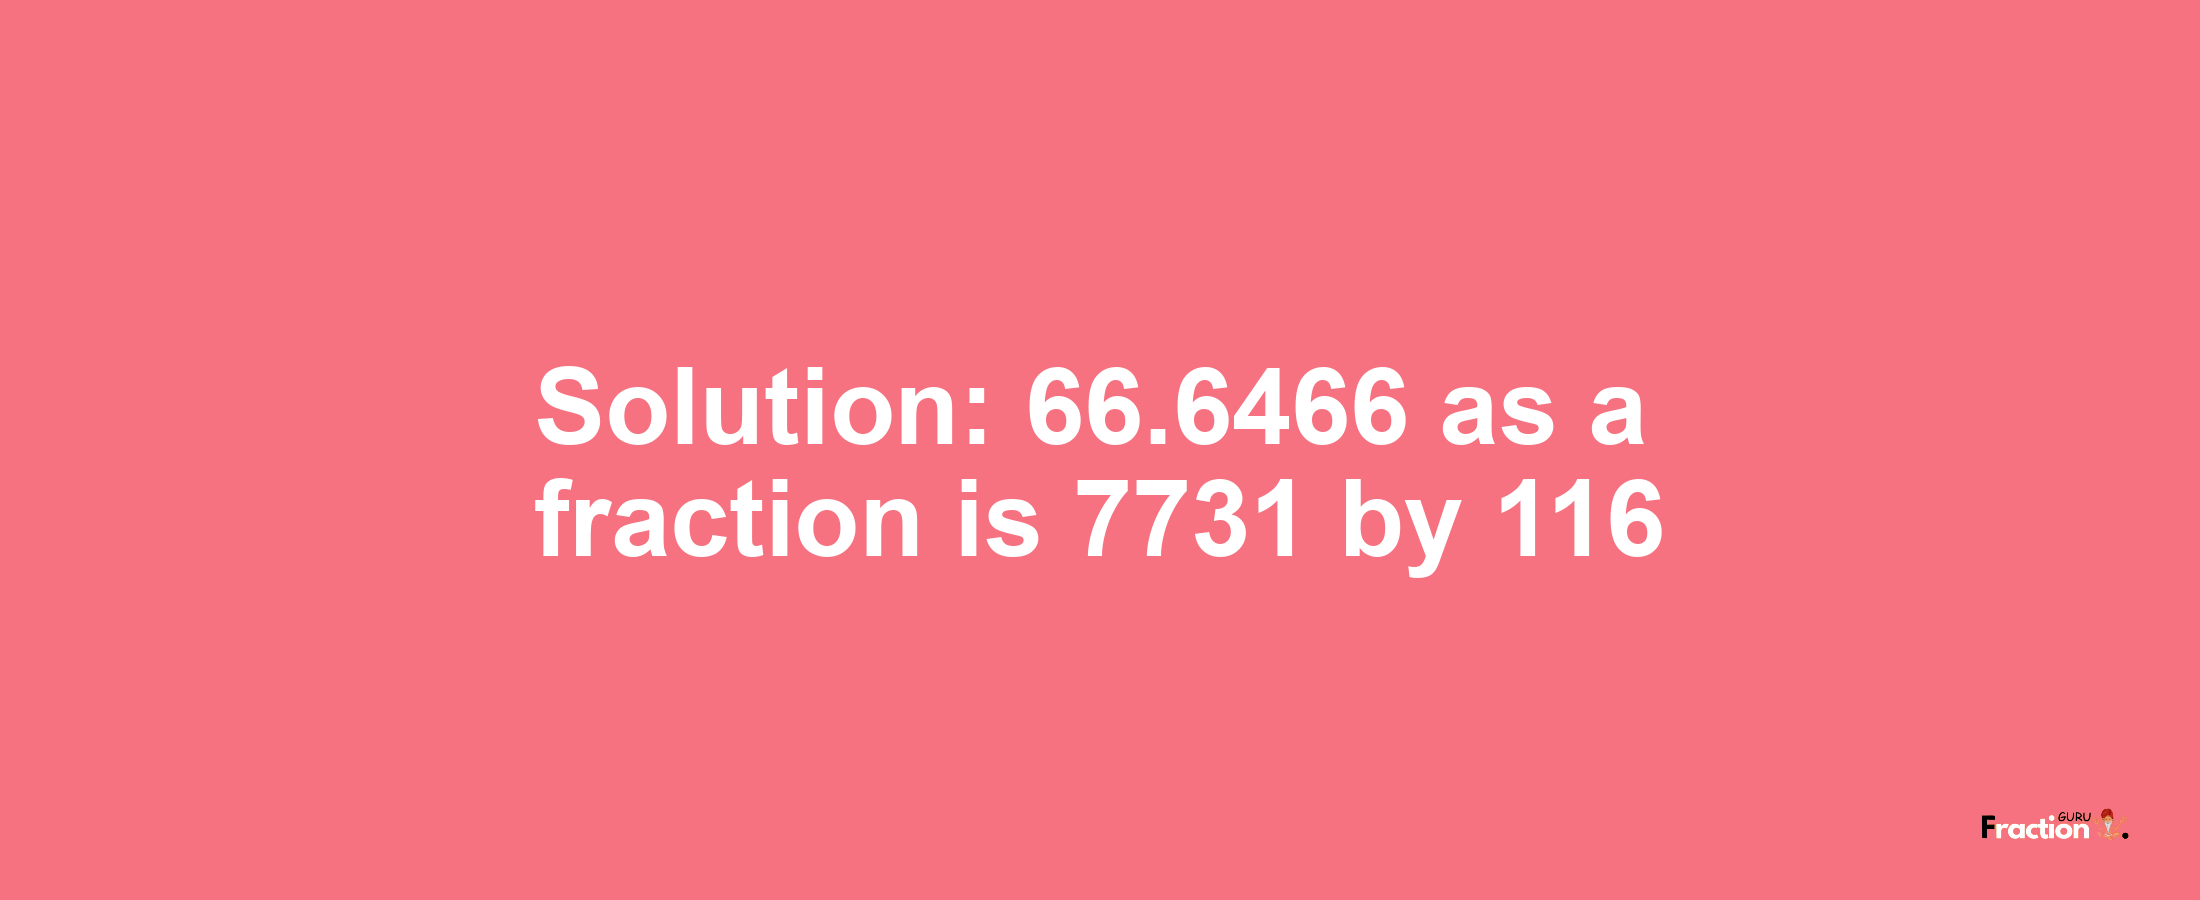 Solution:66.6466 as a fraction is 7731/116